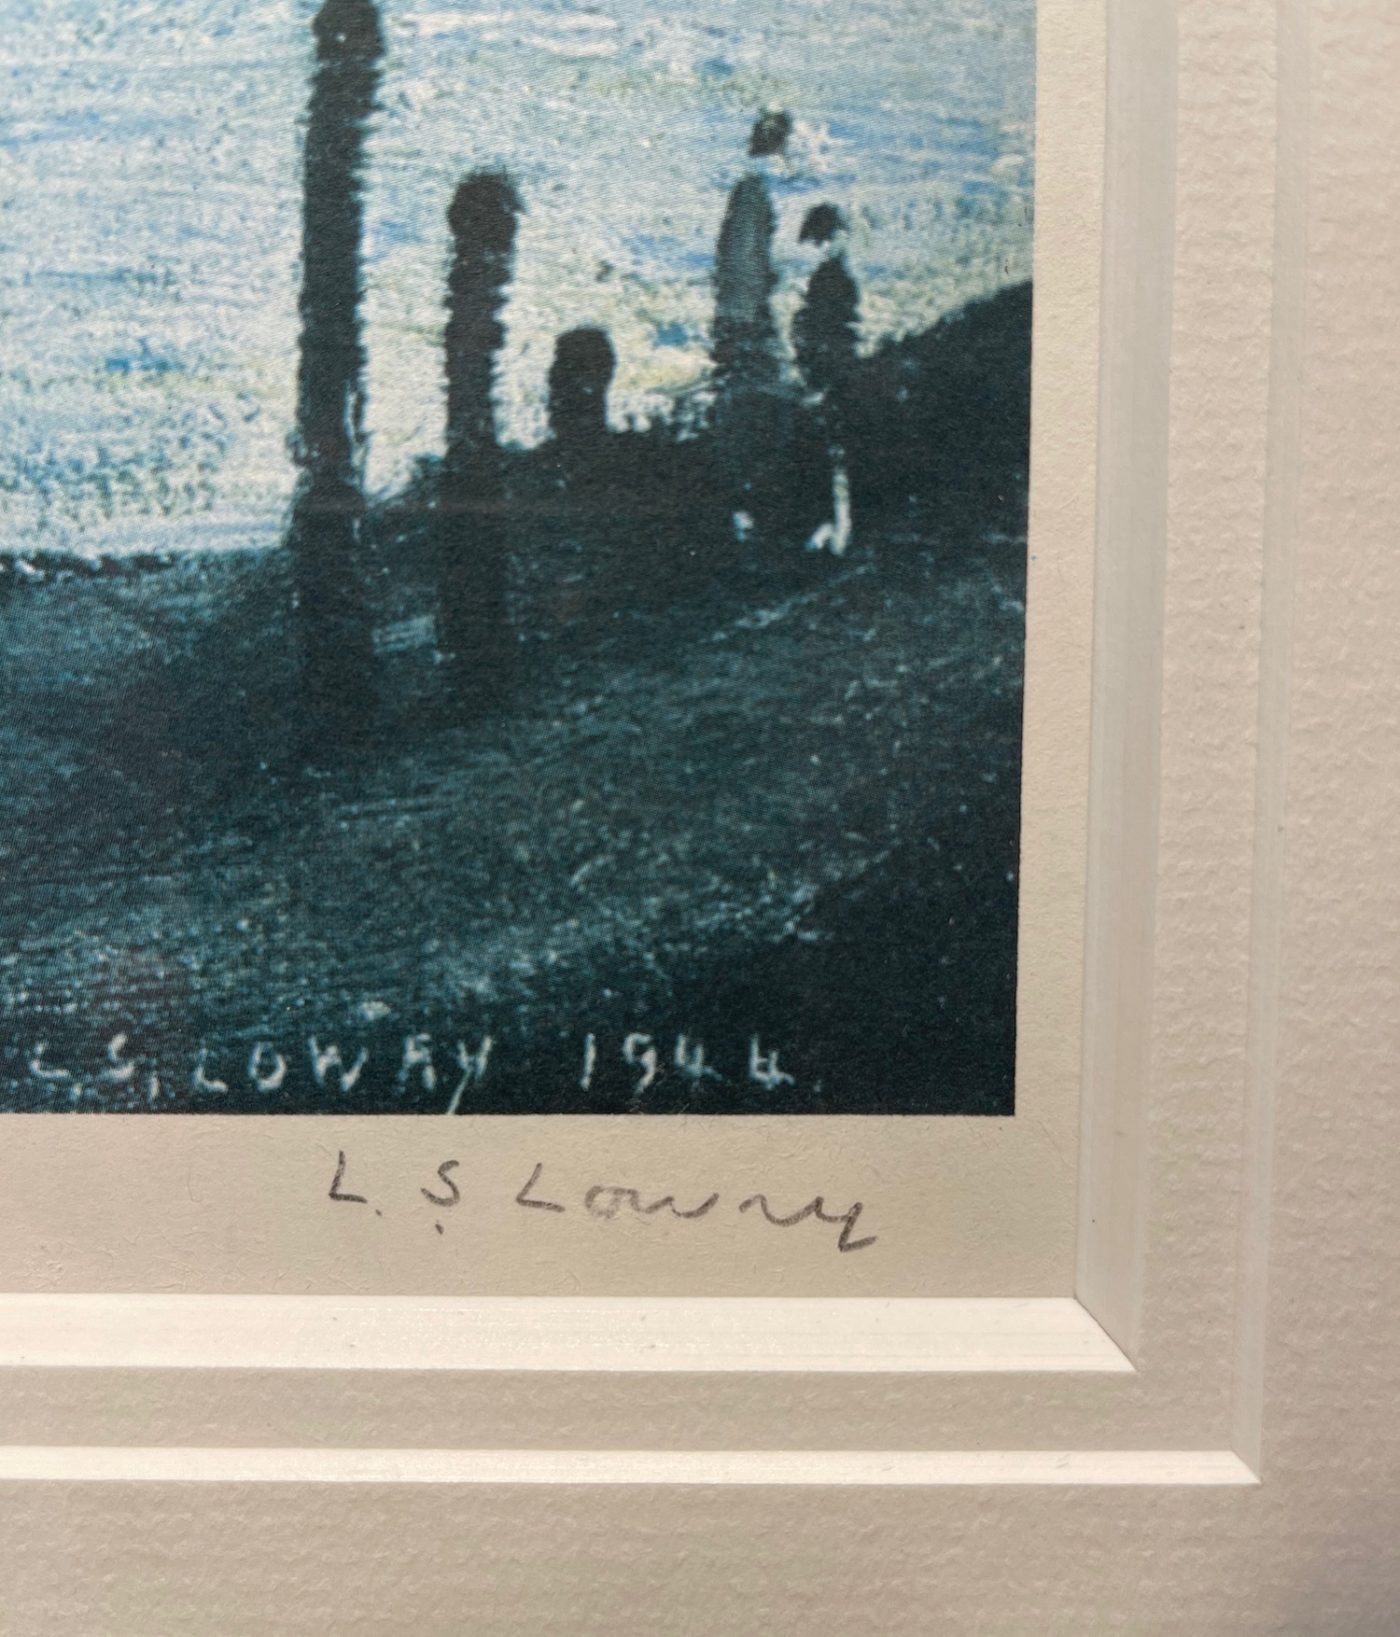 lowry prints industrial town investment